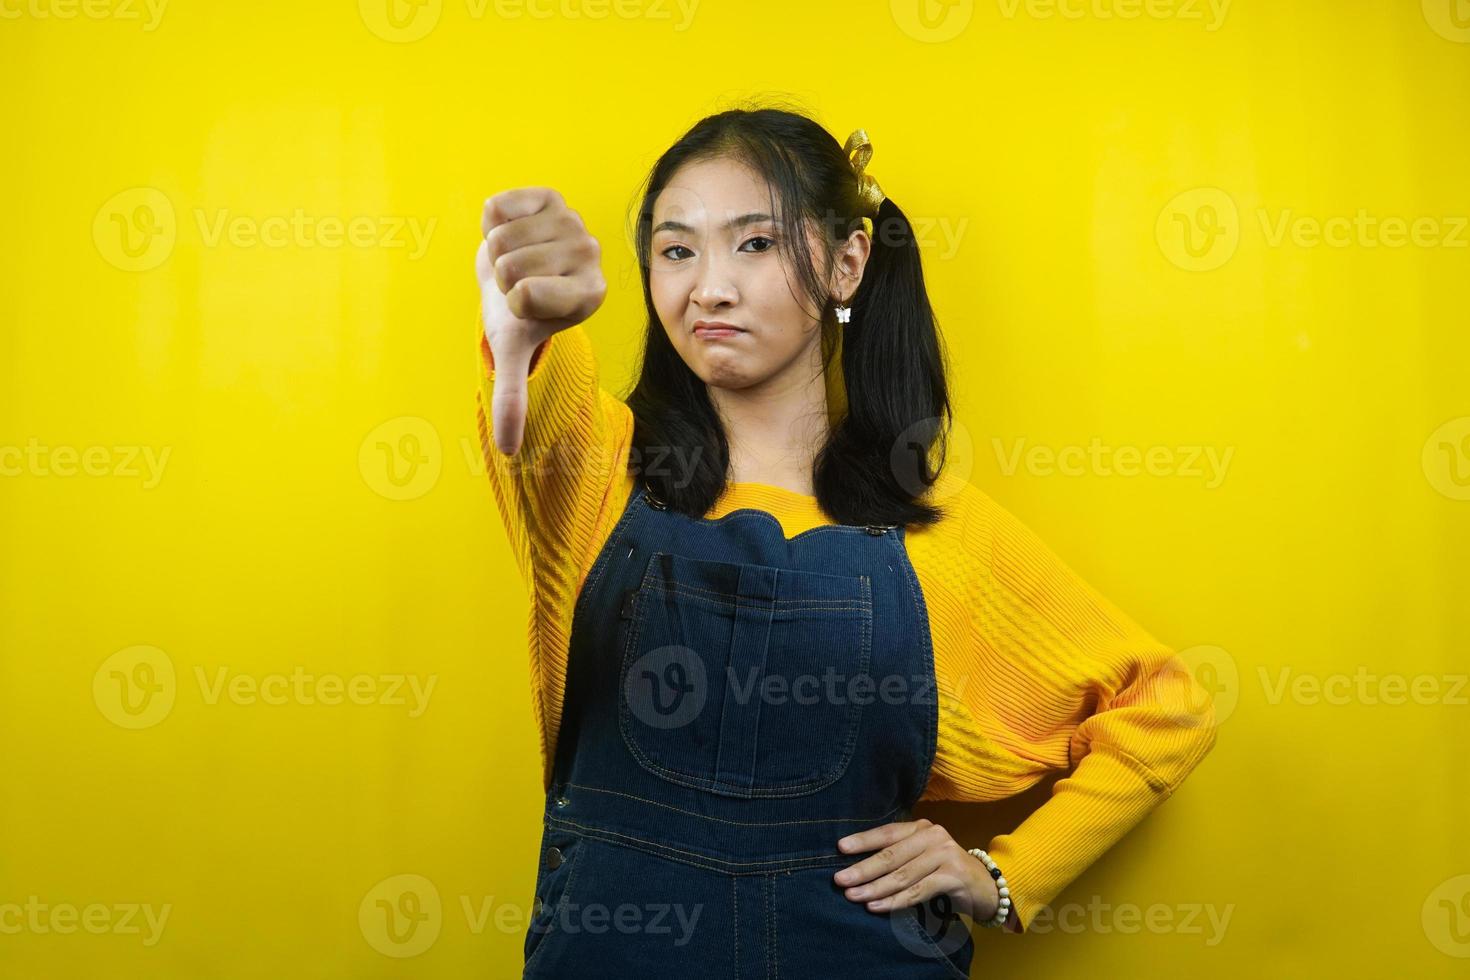 Pretty and cute young woman with dislike sign, angry, displeased, mocking sign, isolated photo